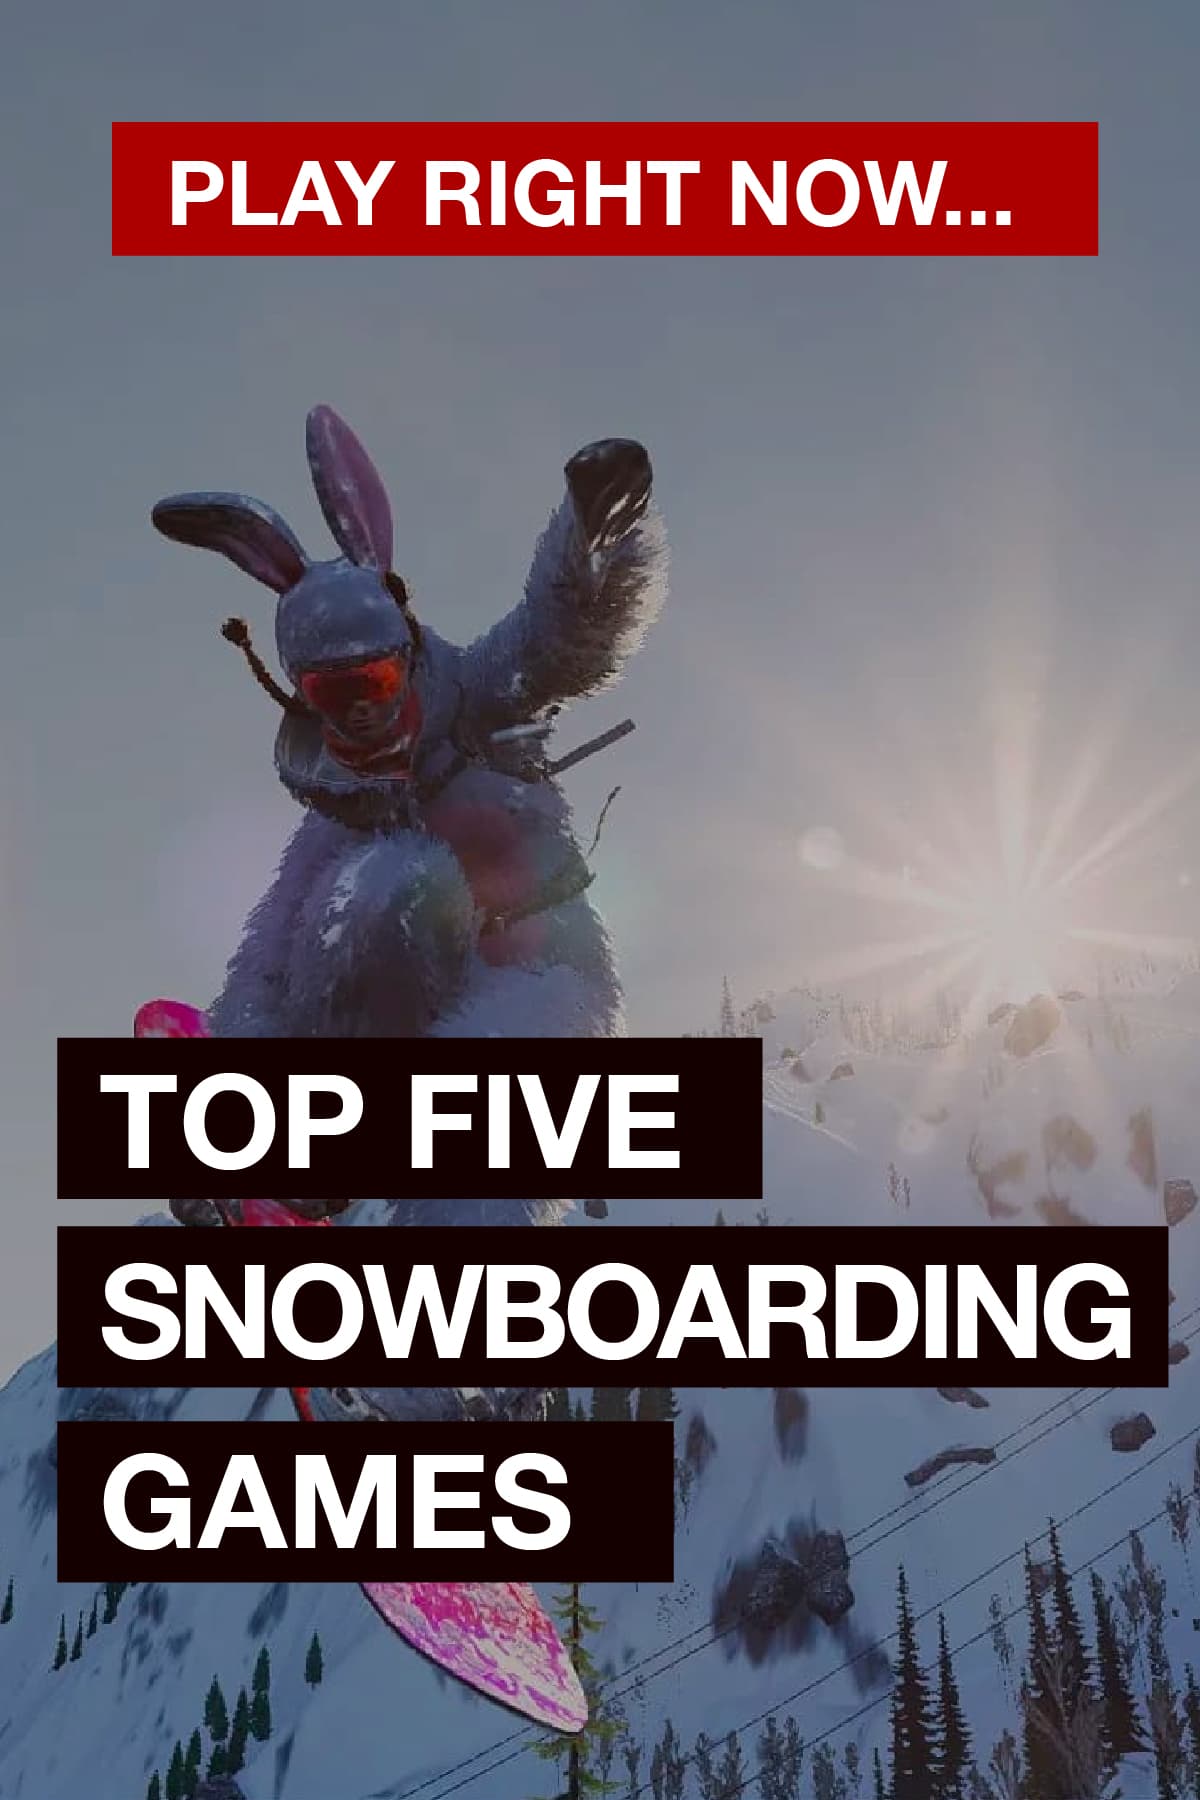 Top Five Snowboarding Games Right Now